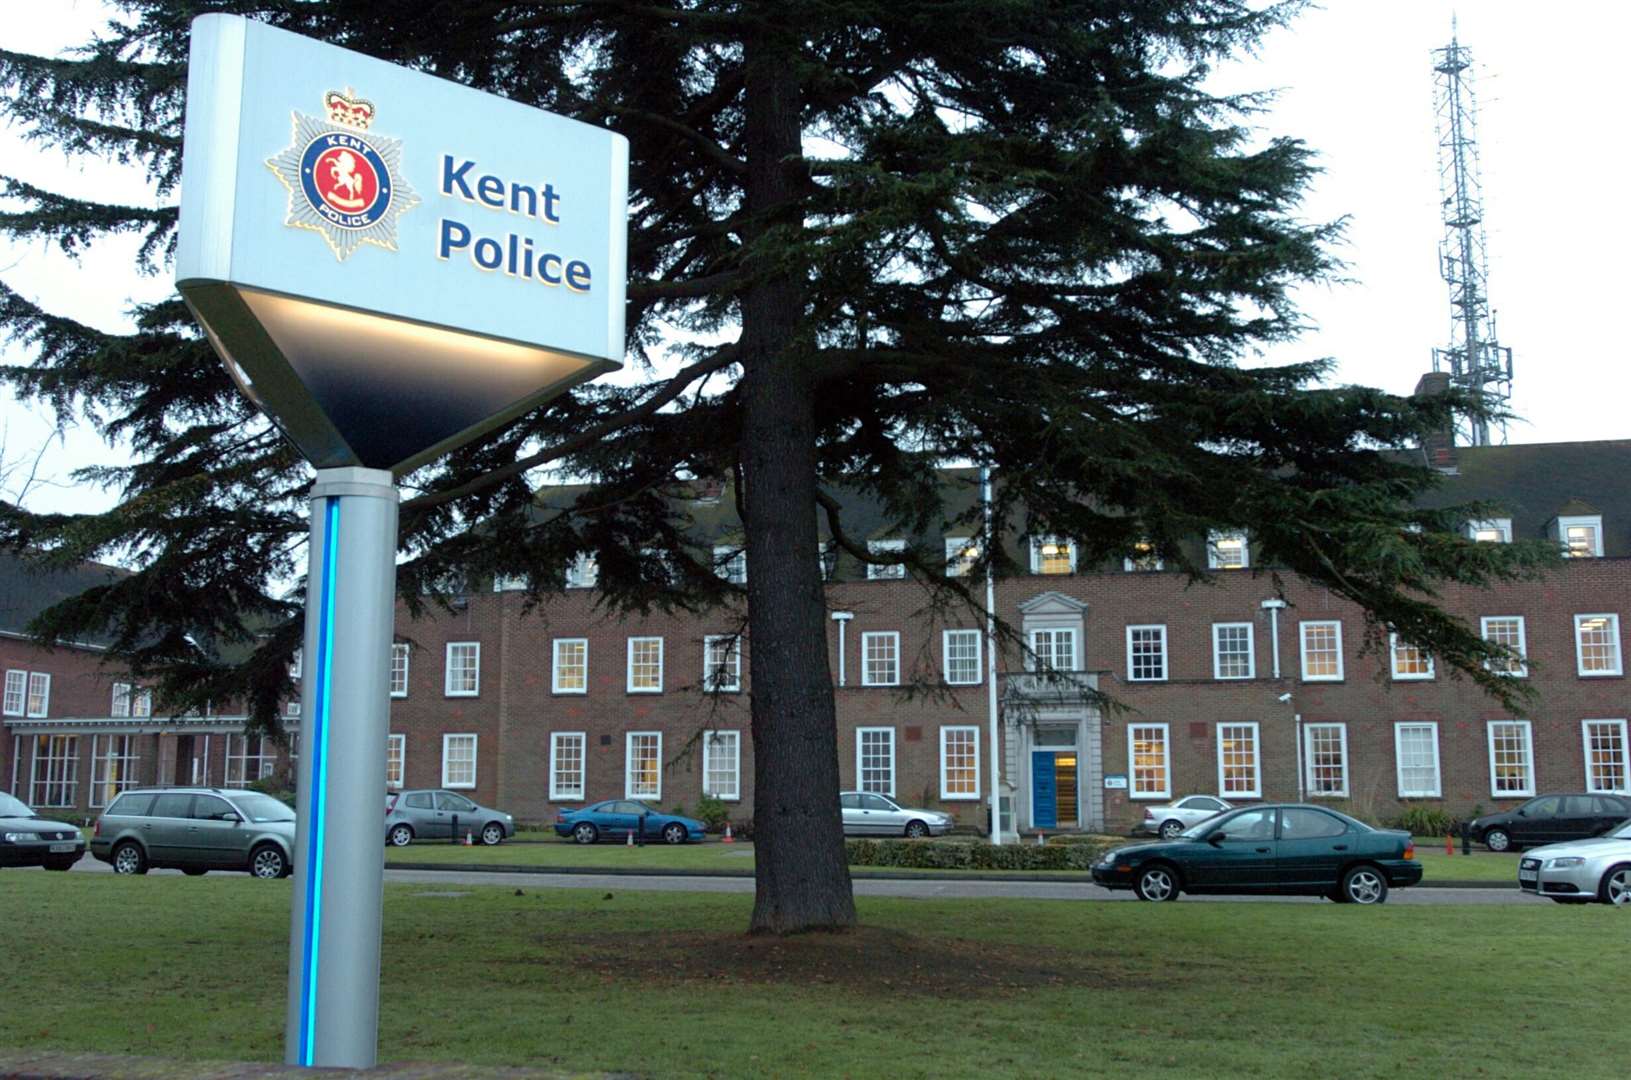 The Kent Police headquarters on Sutton Road, Maidstone